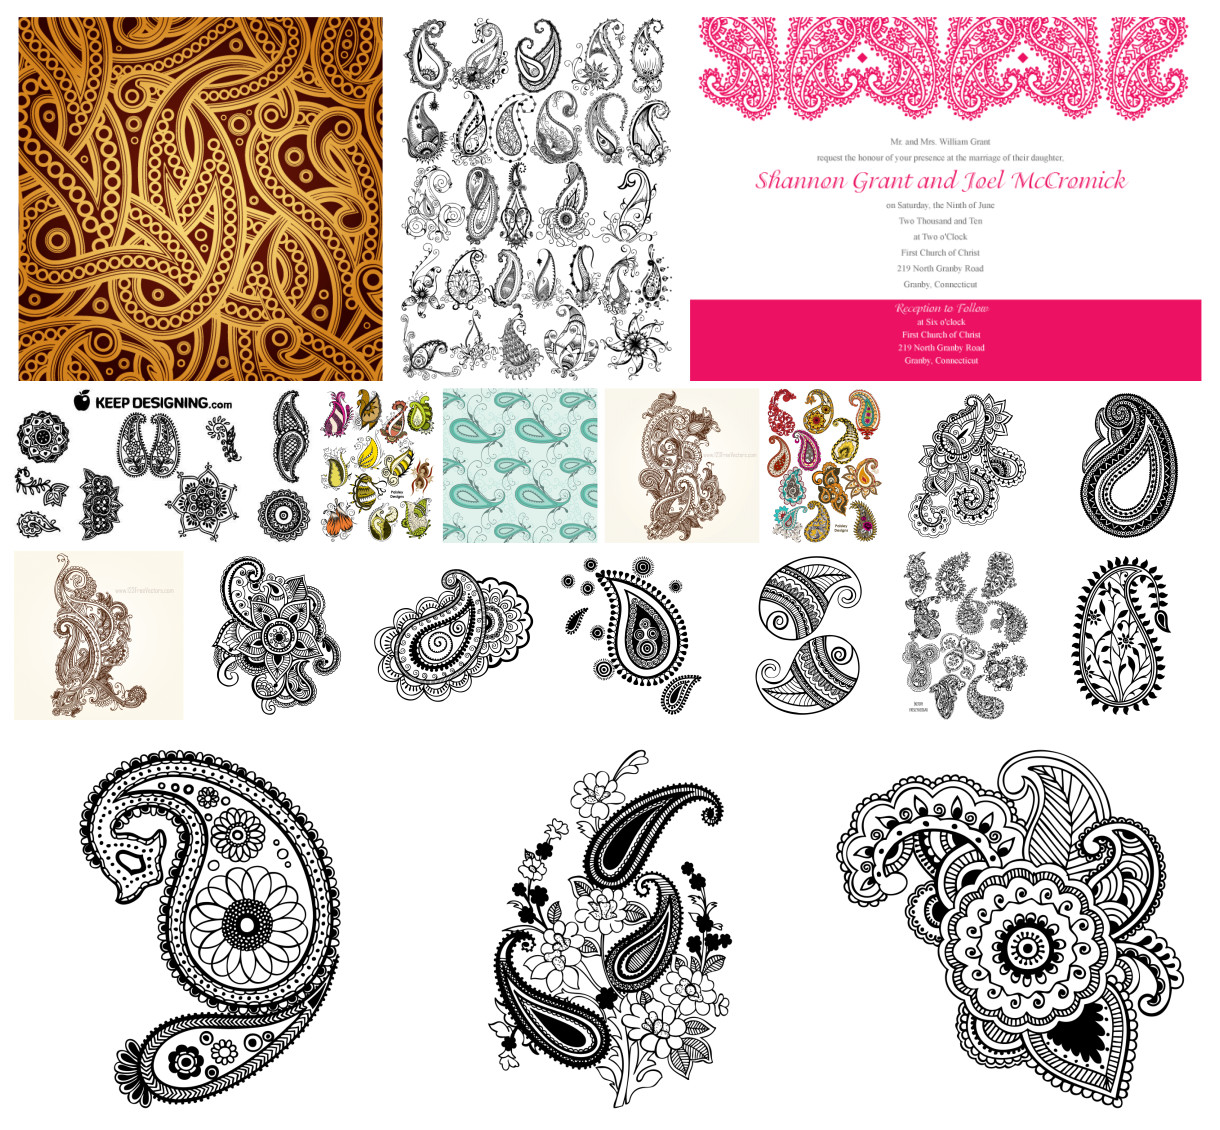 20 Paisley Vector Design Resources: Free and Premium, Fully Editable!